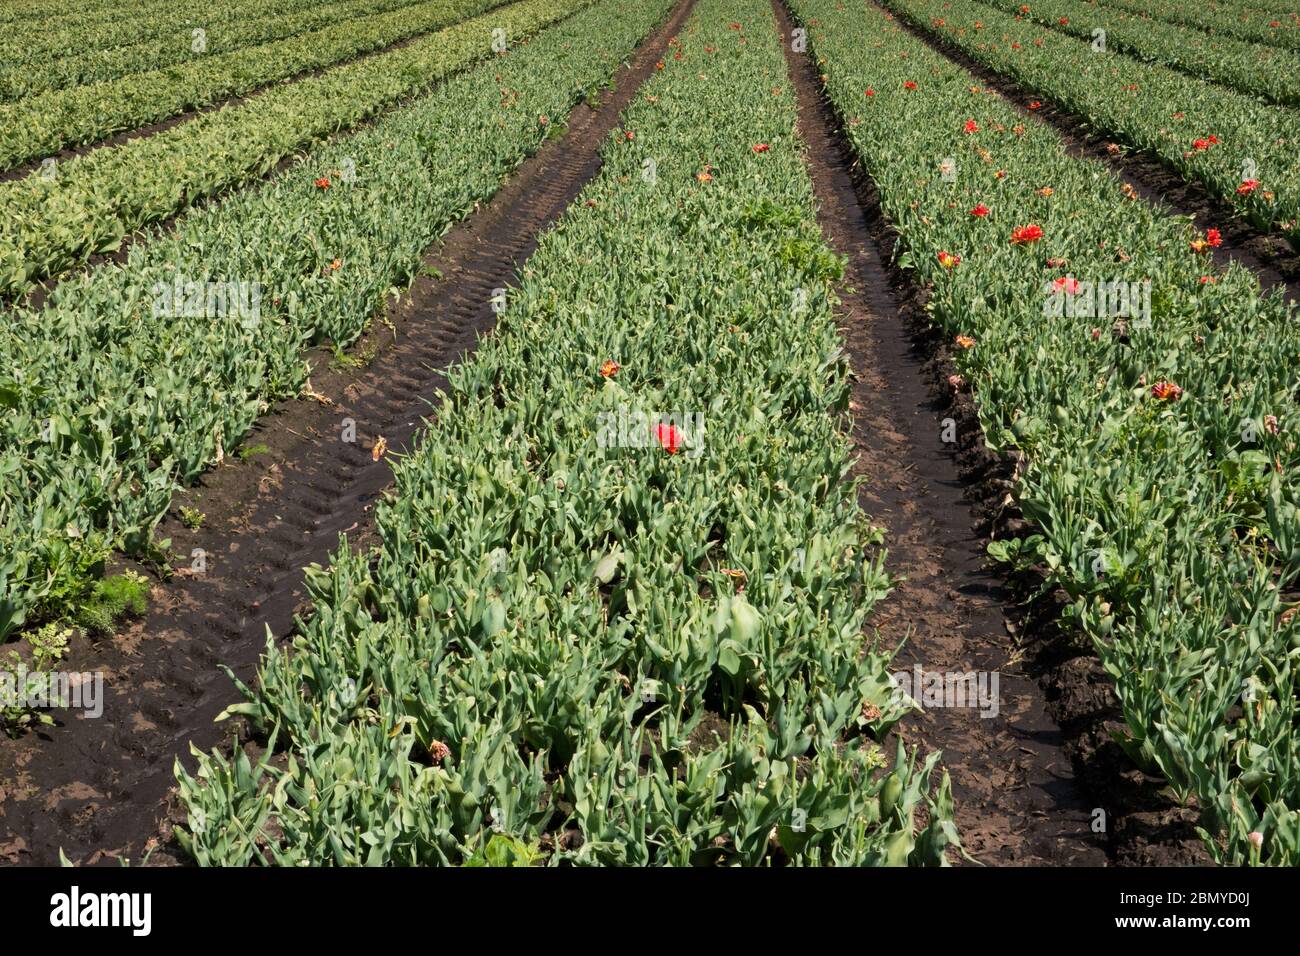 Tulip field for bulb cultivation in the Dutch countryside, flower heads are removed to stimulate production of bulbs Stock Photo